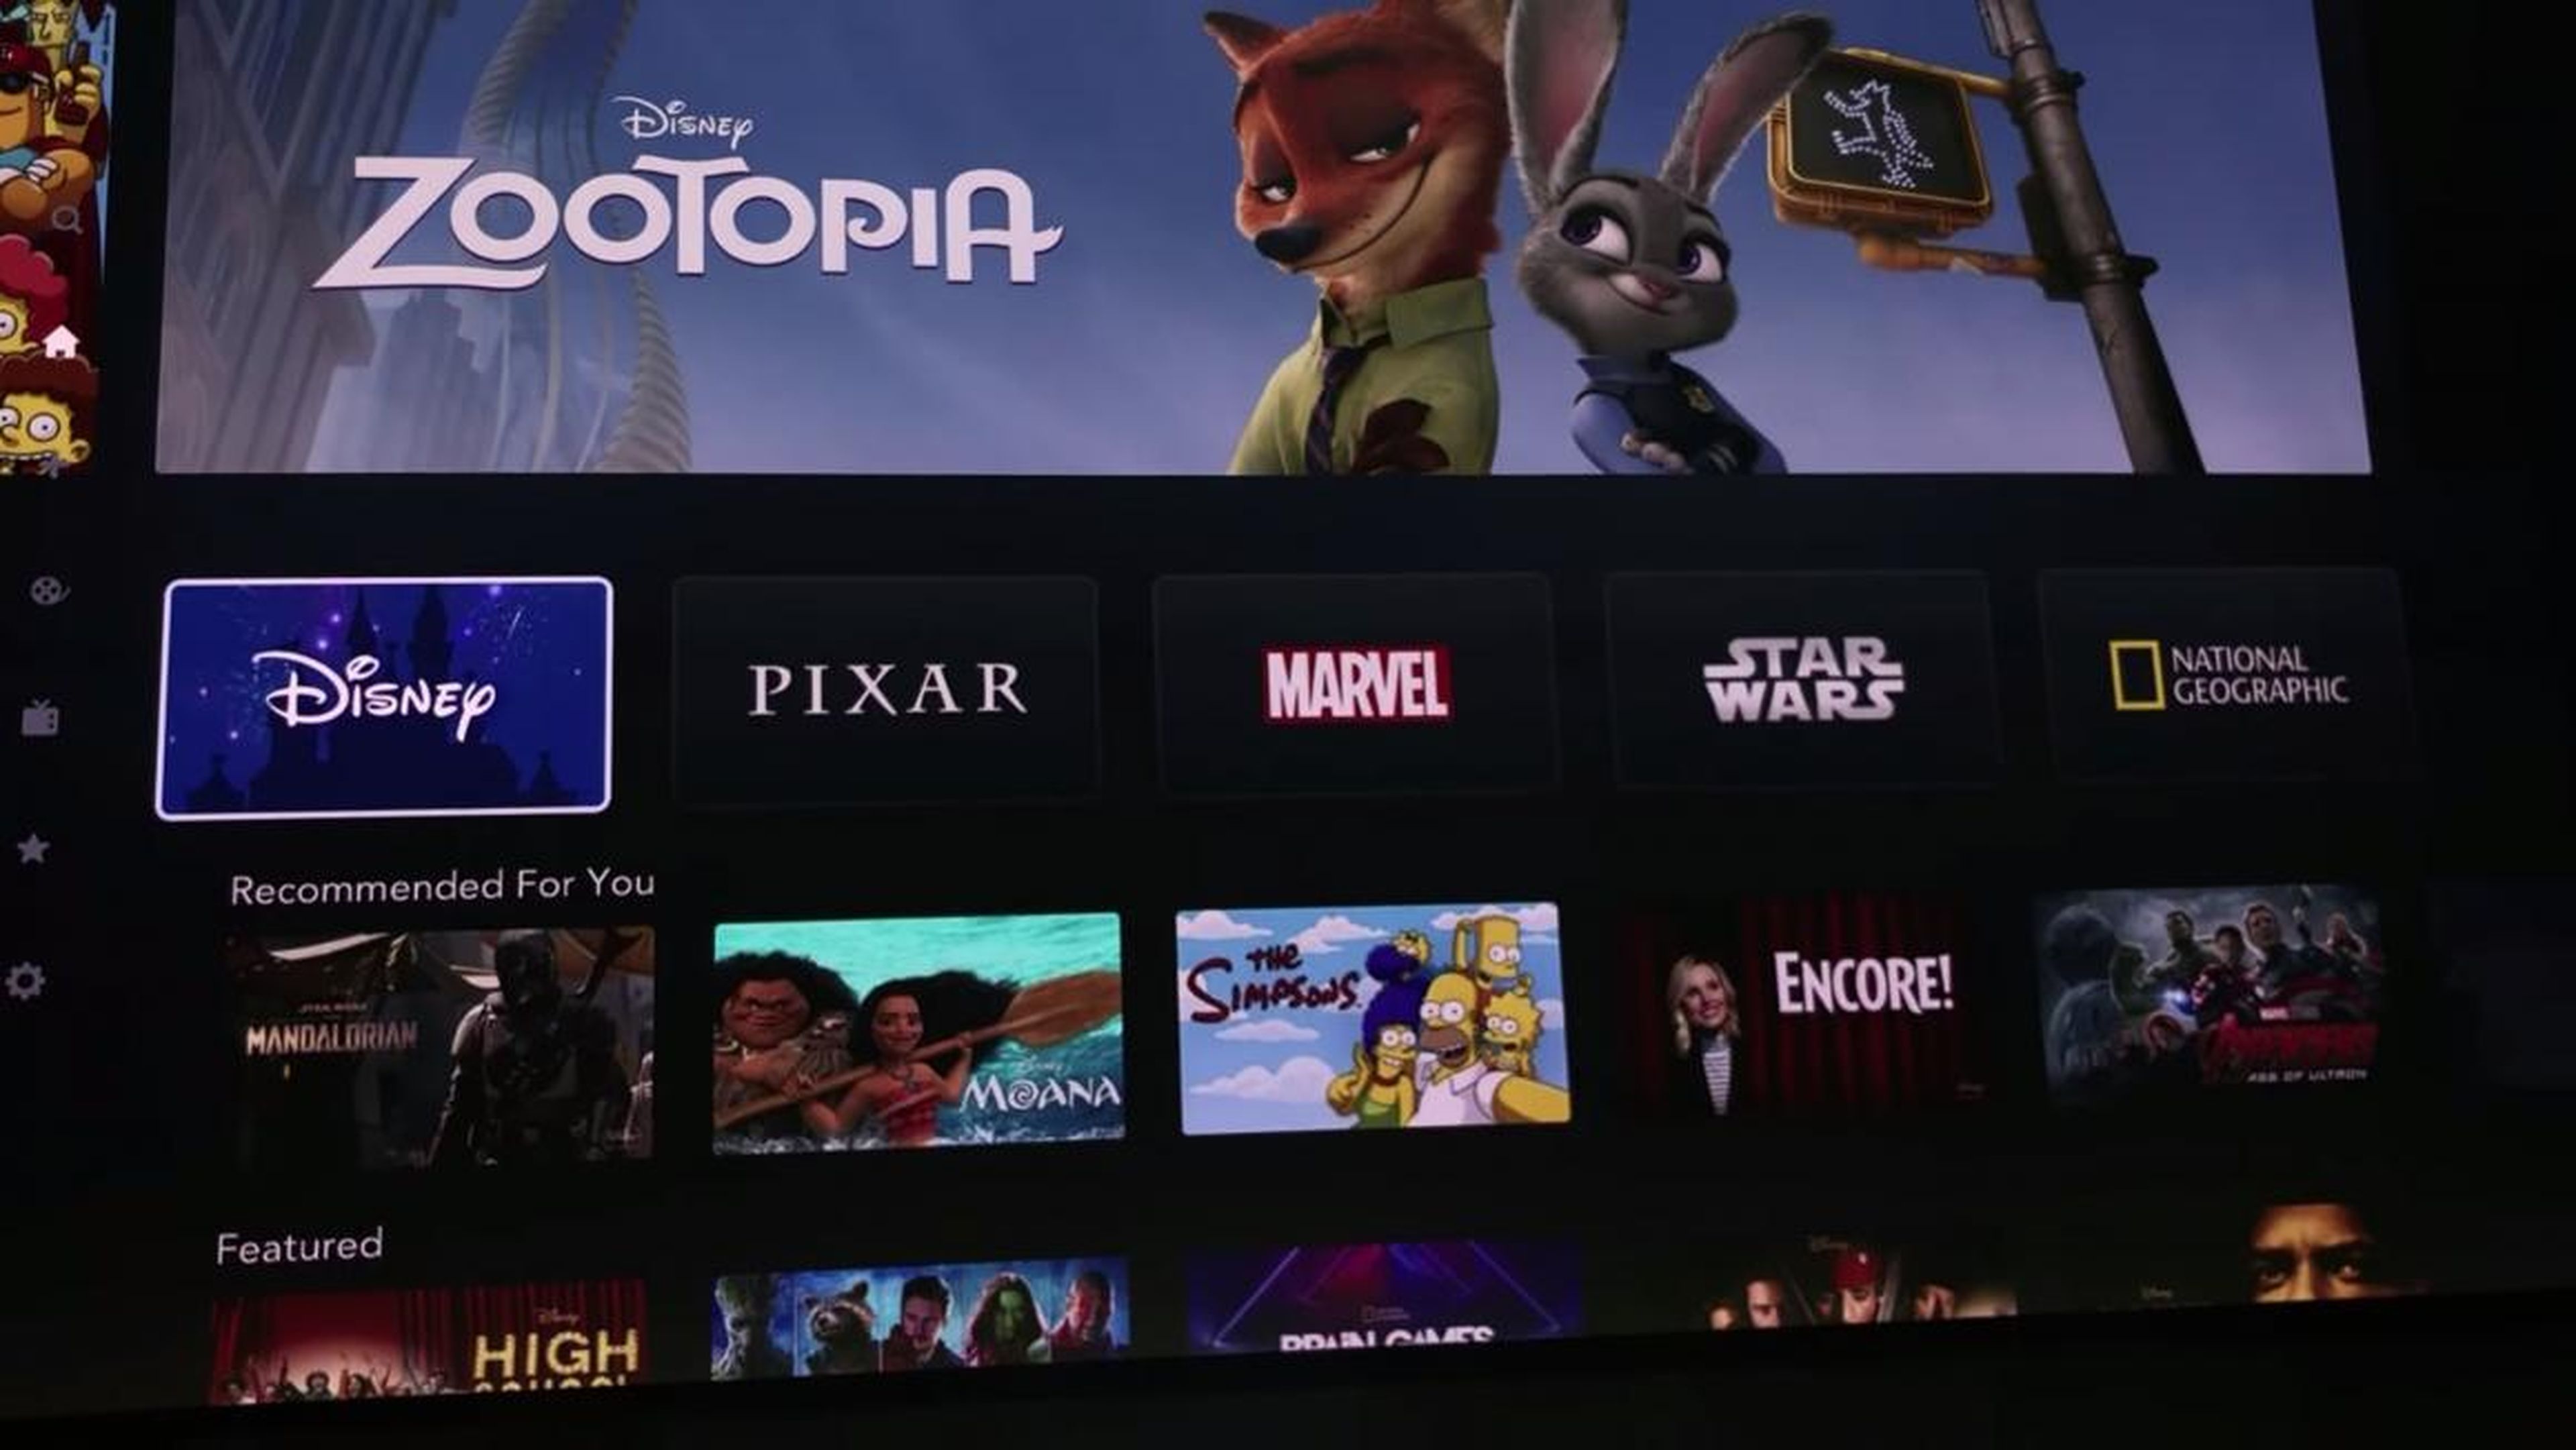 All in all, Disney Plus should be familiar to anyone who uses Netflix; it even has similar row categories, like "Recommended For You," based off you viewing habits. The best part though: Anything on Disney Plus can be downloaded